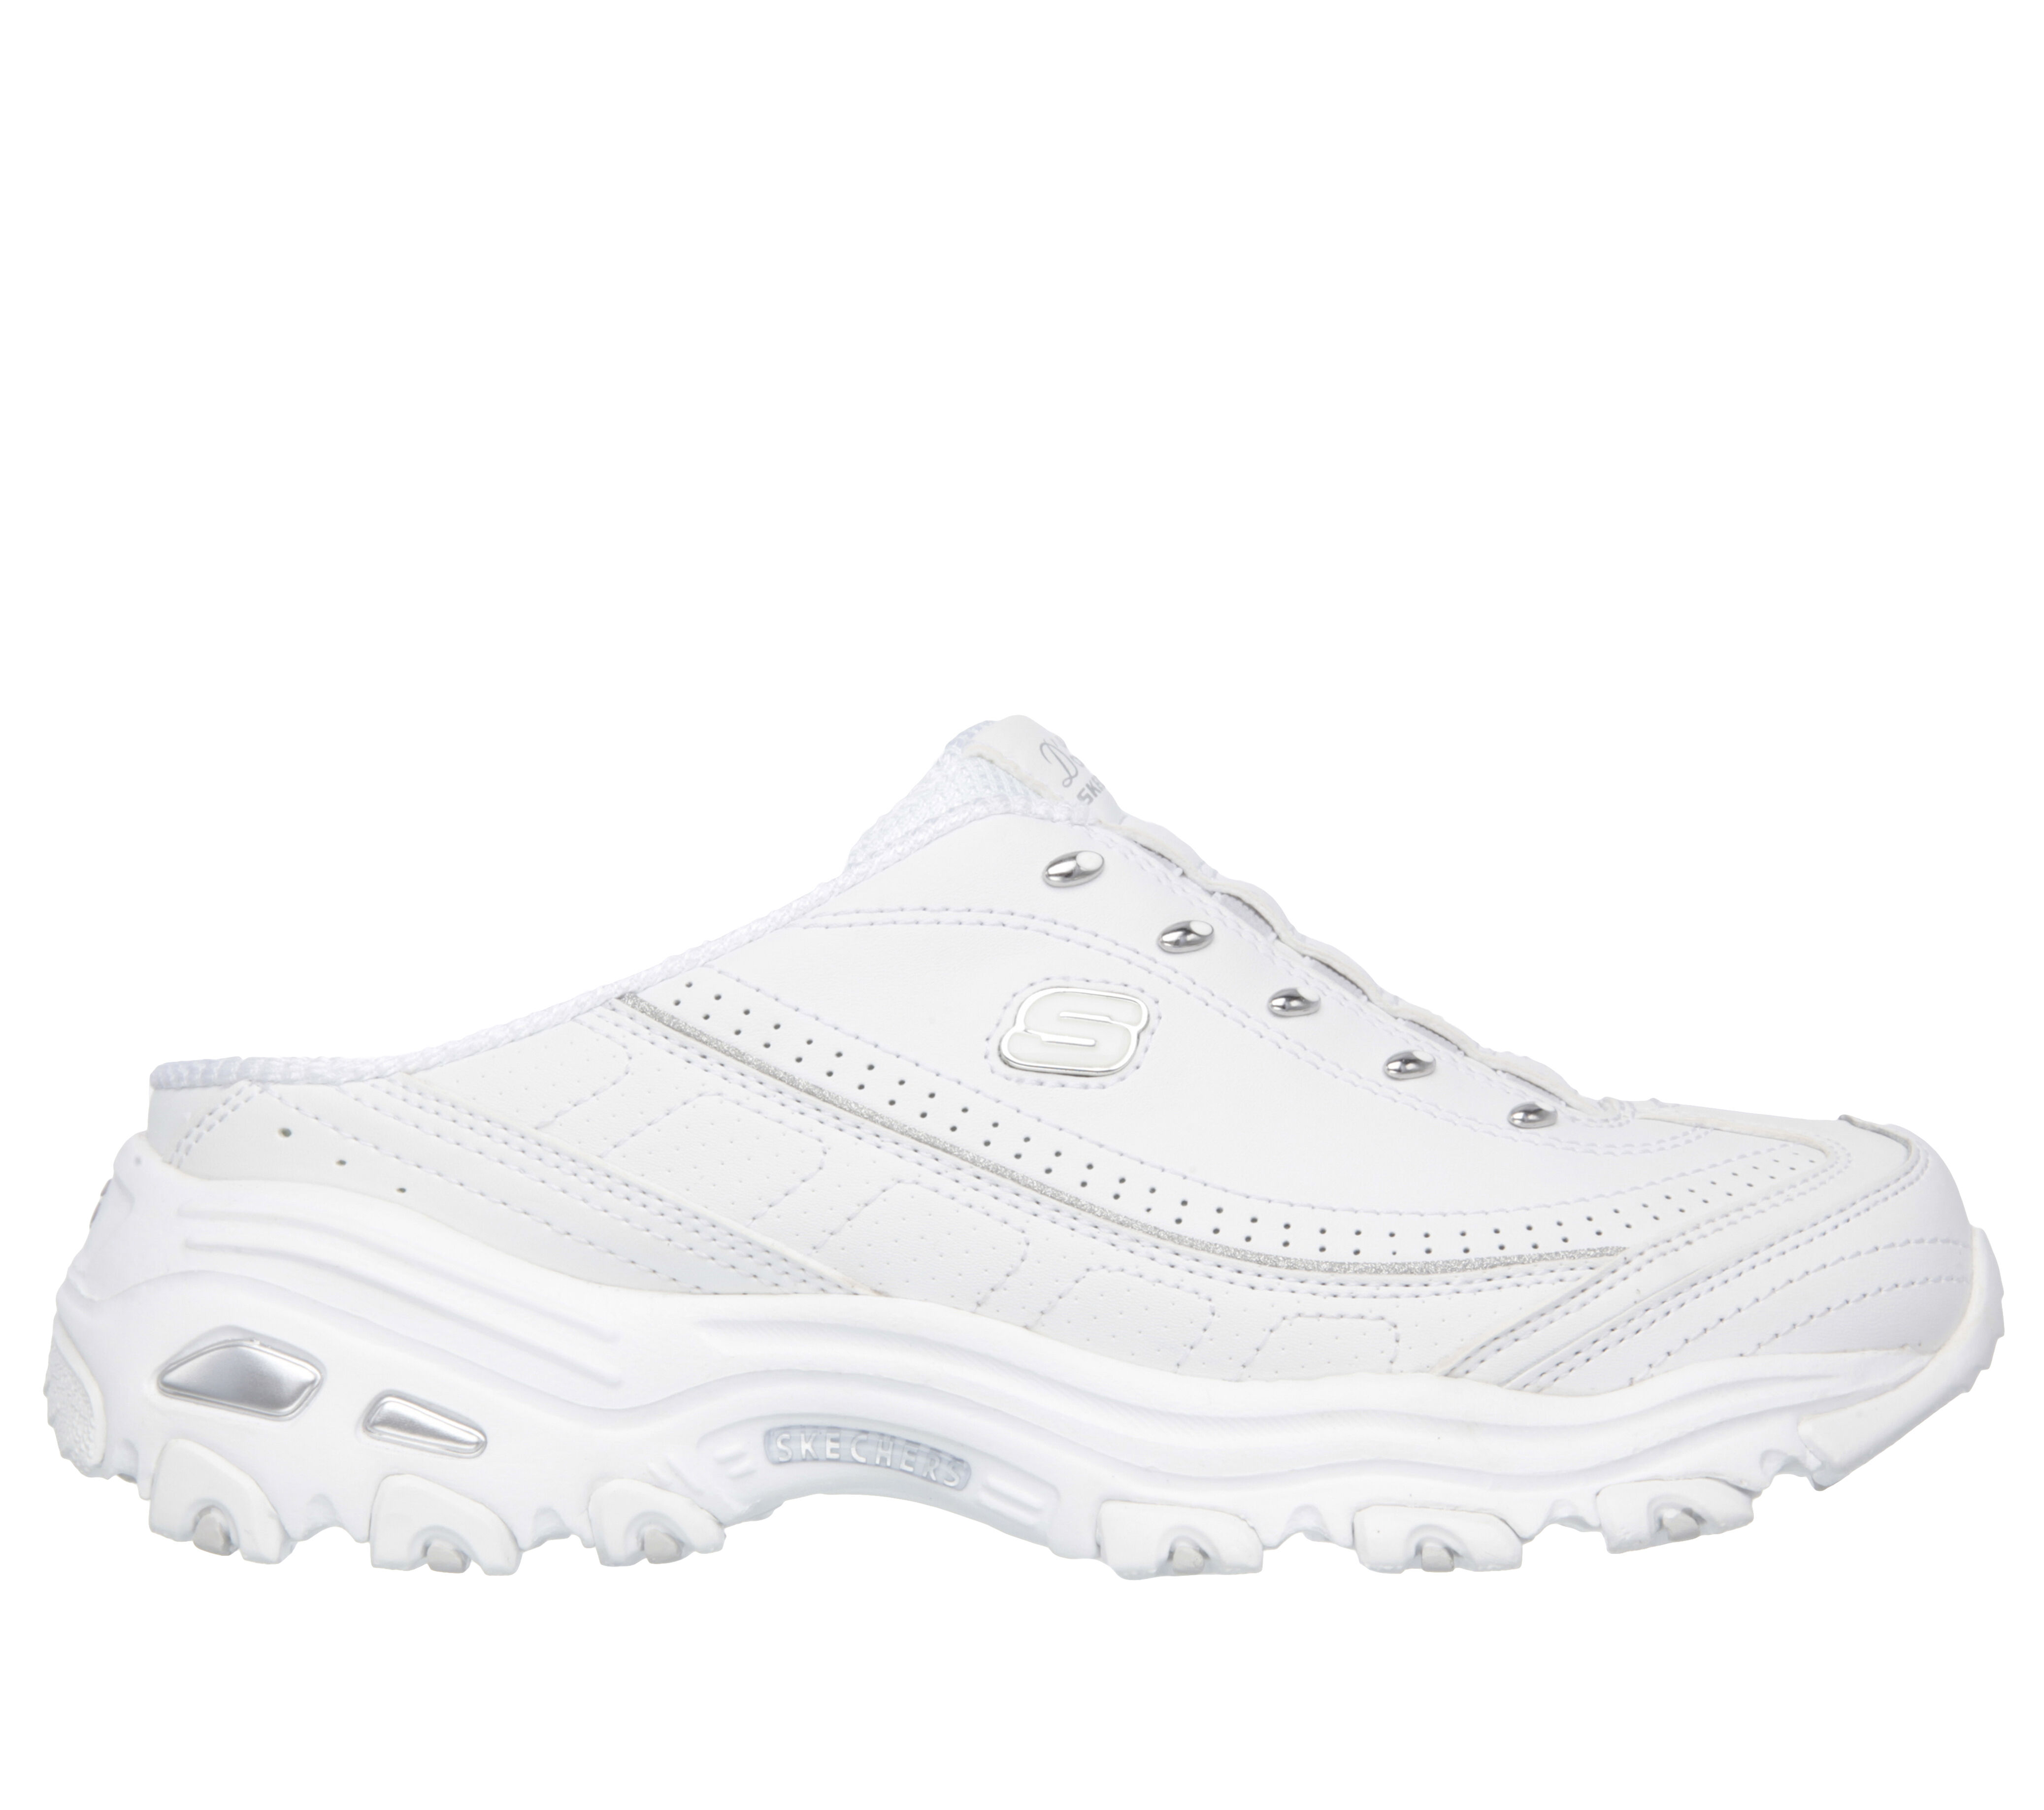 skechers white and silver sneakers